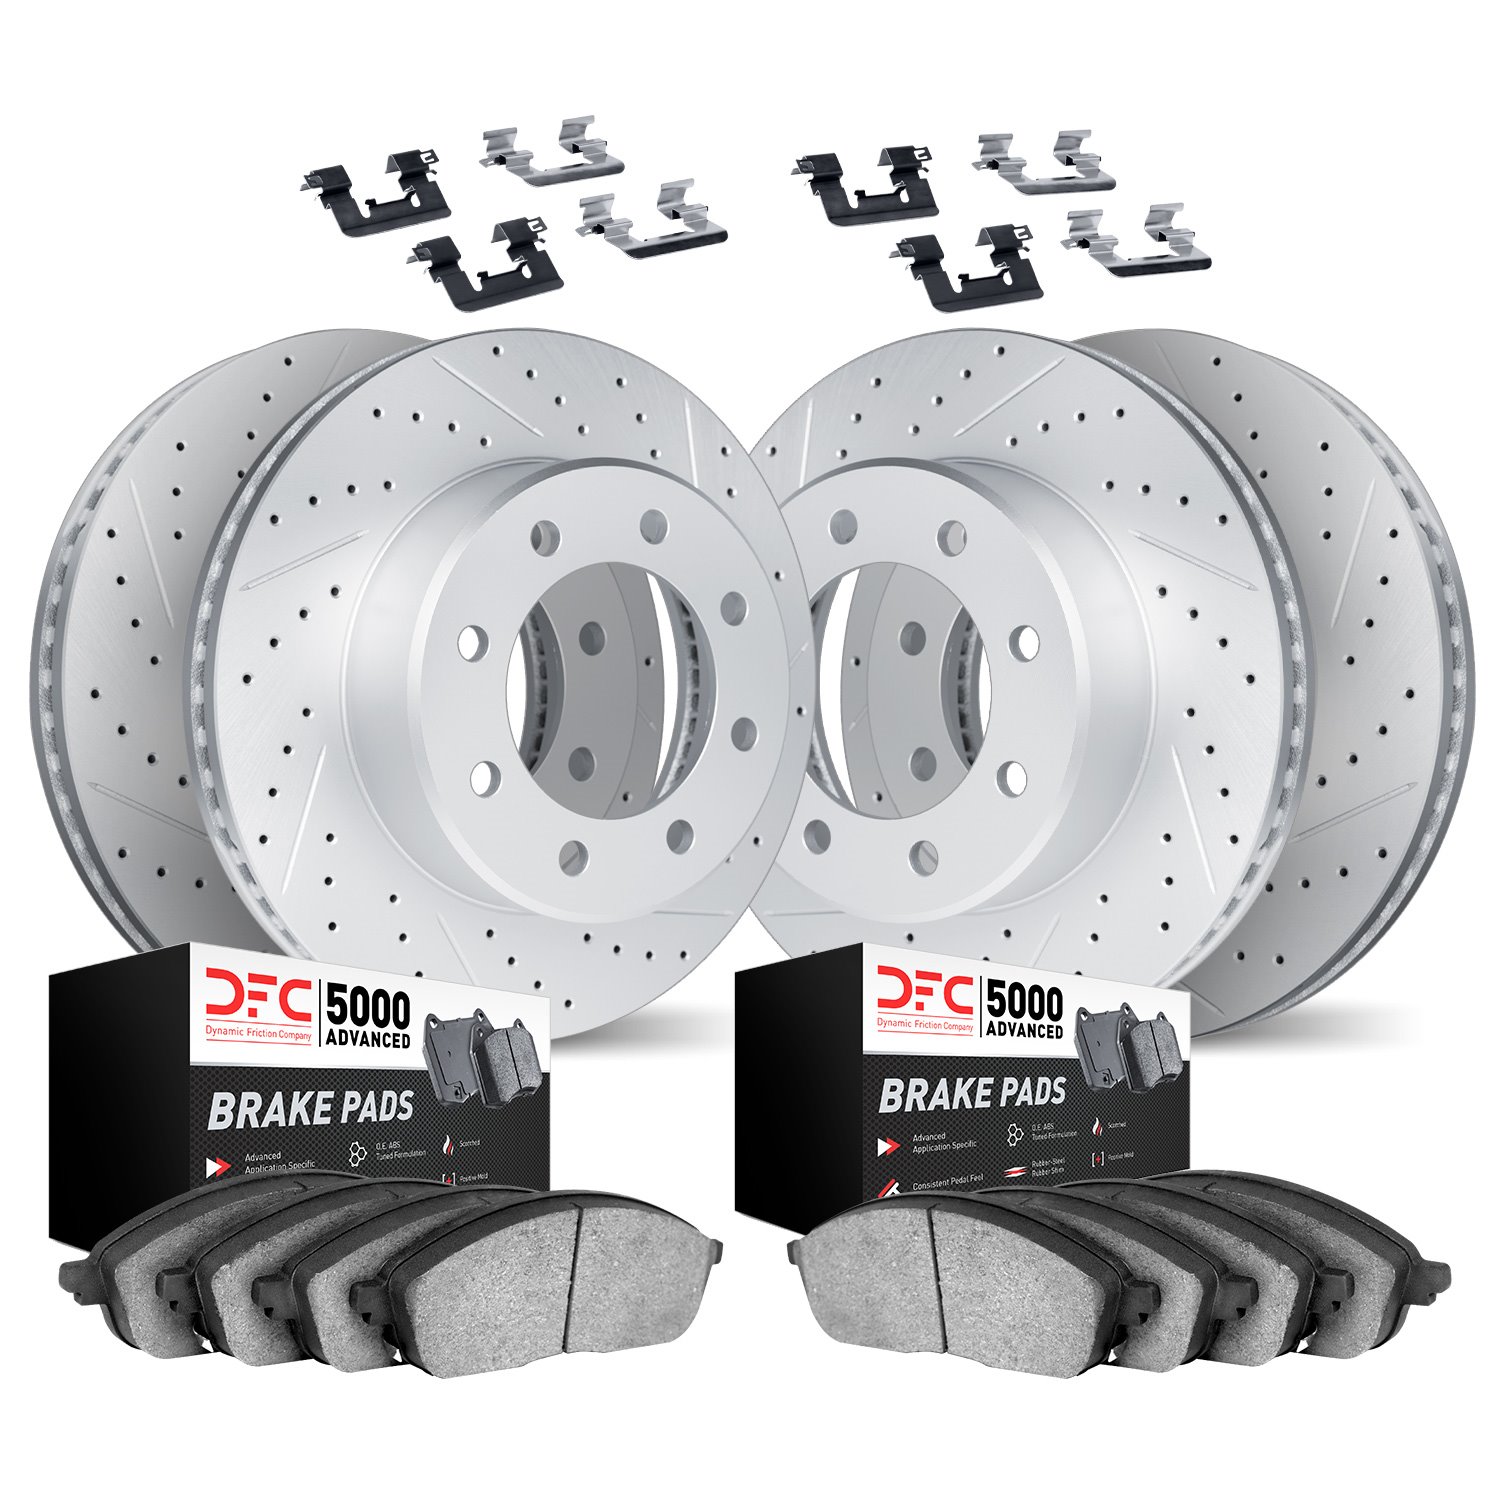 2514-48036 Geoperformance Drilled/Slotted Rotors w/5000 Advanced Brake Pads Kit & Hardware, 2011-2019 GM, Position: Front and Re